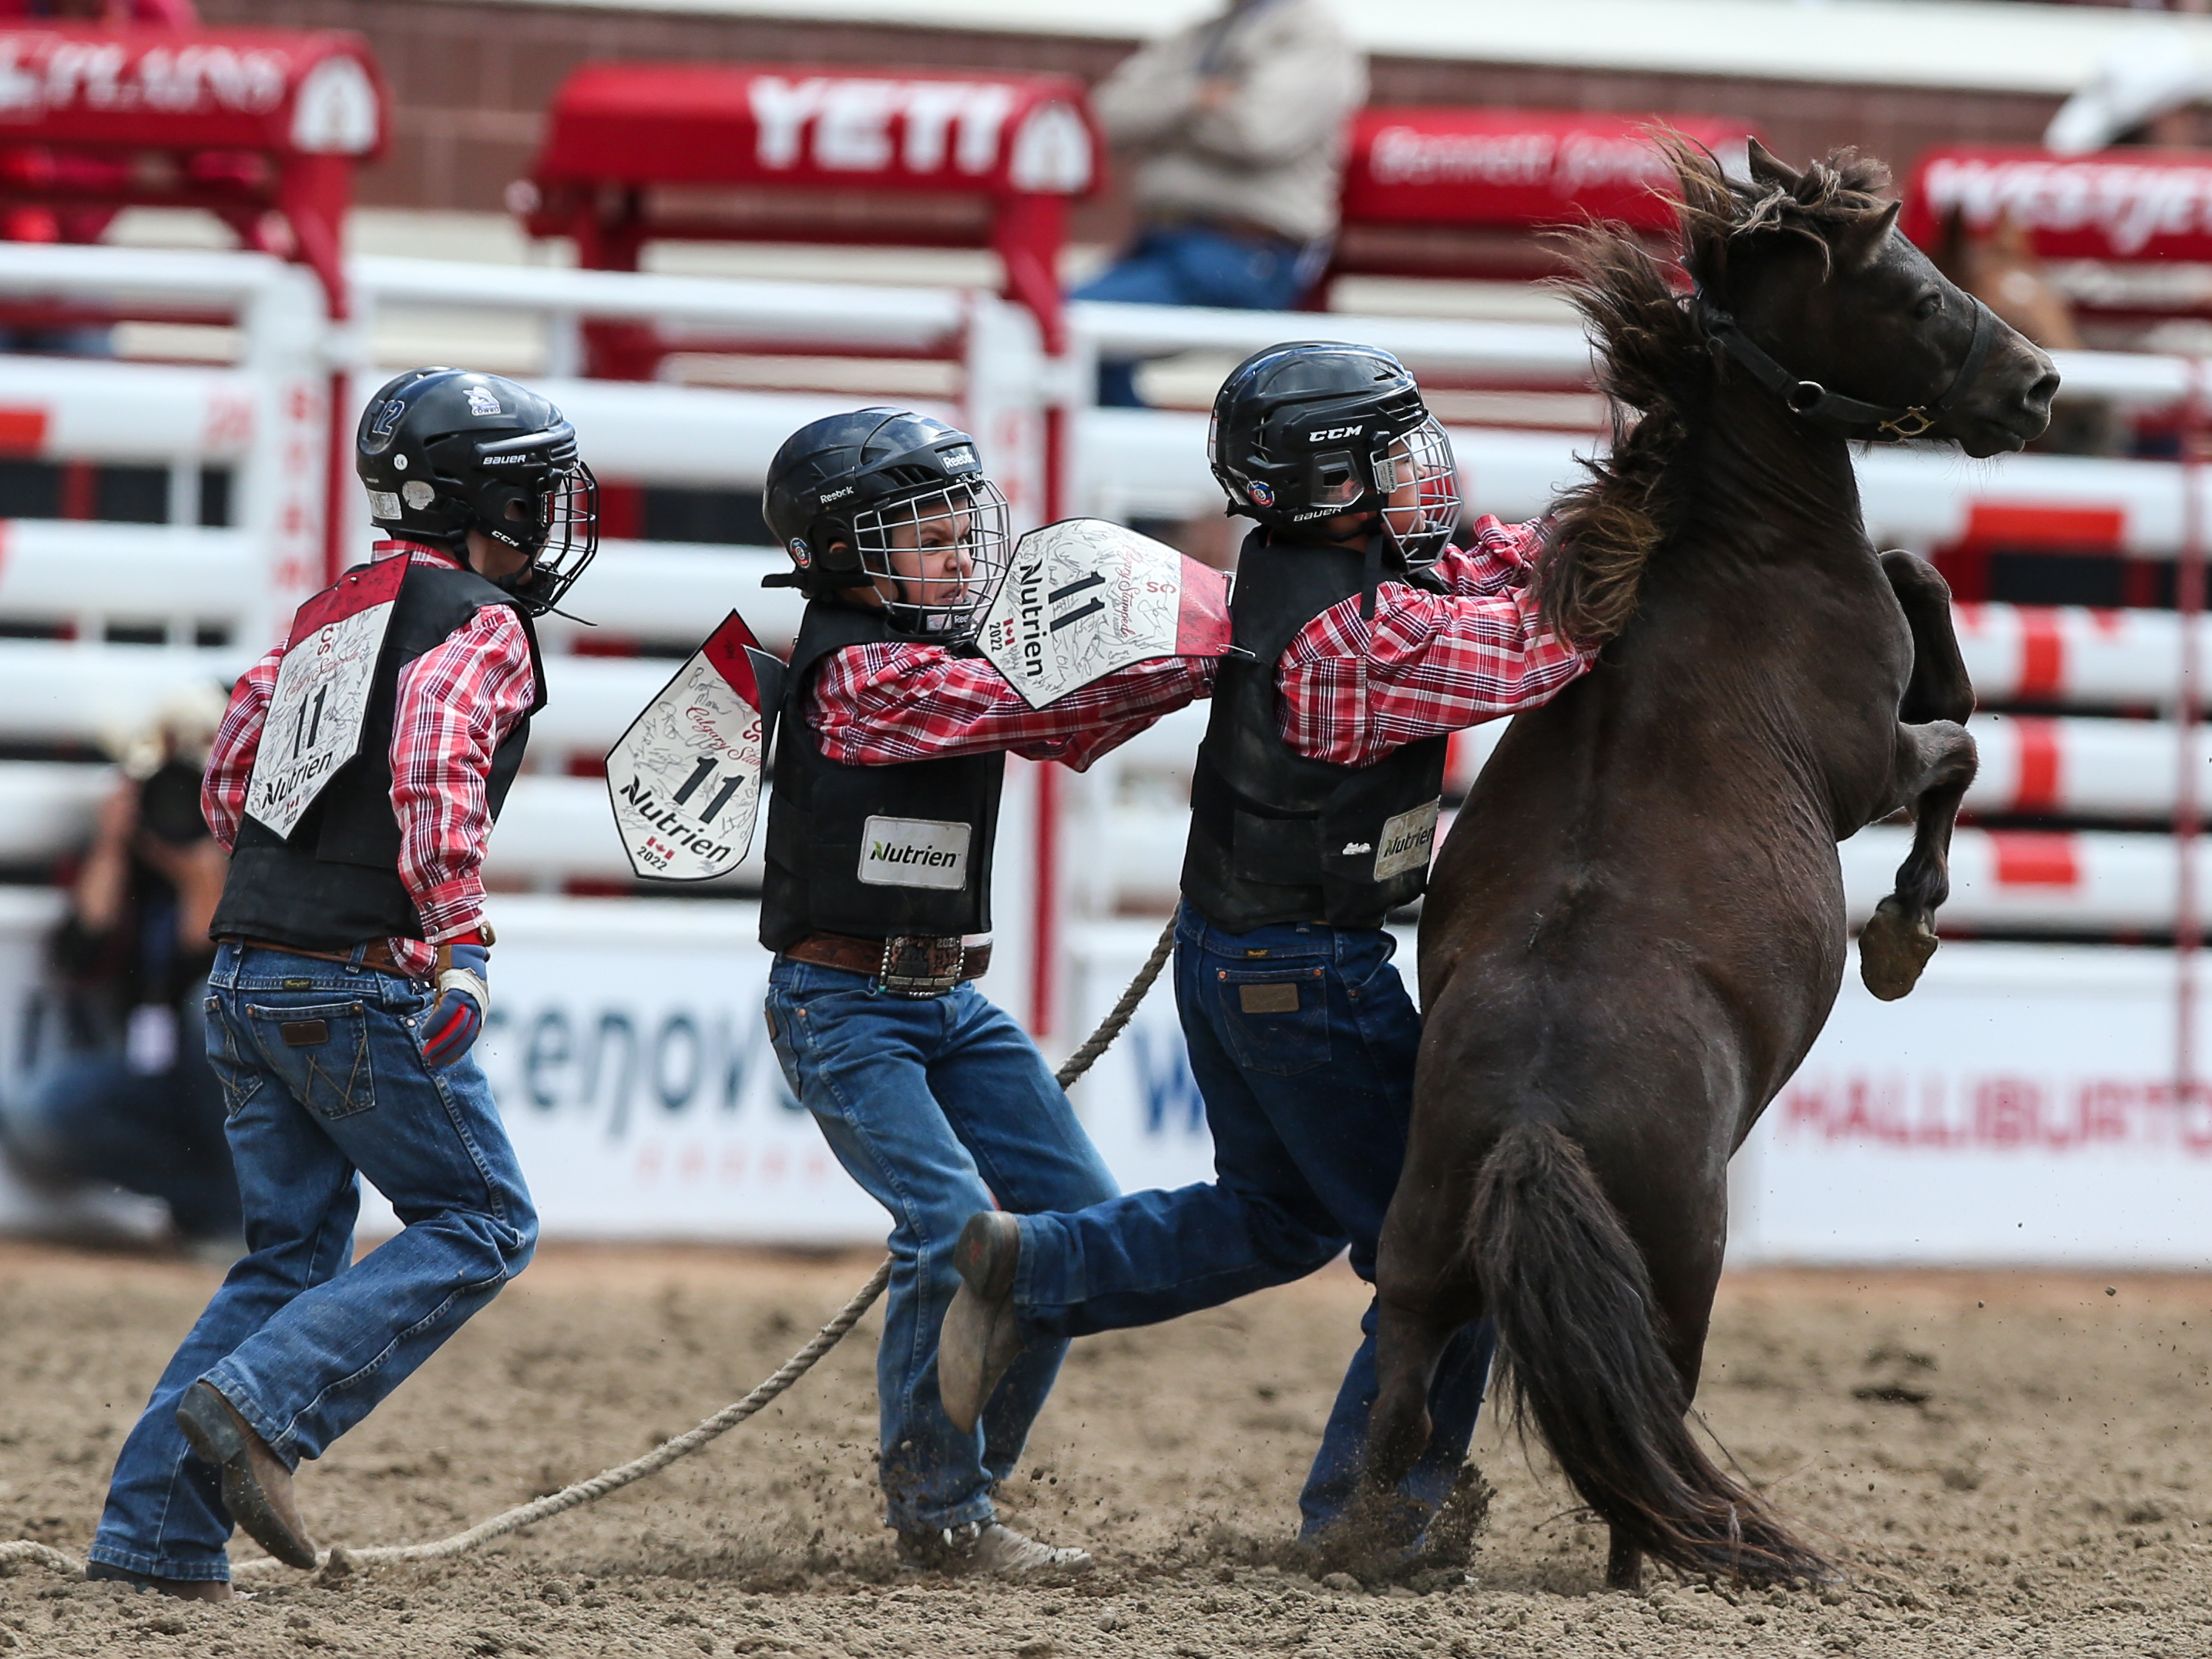 Wild Rodeo Porn - Calgary Stampede Day 3: Weekend recap and look ahead - LiveWire Calgary